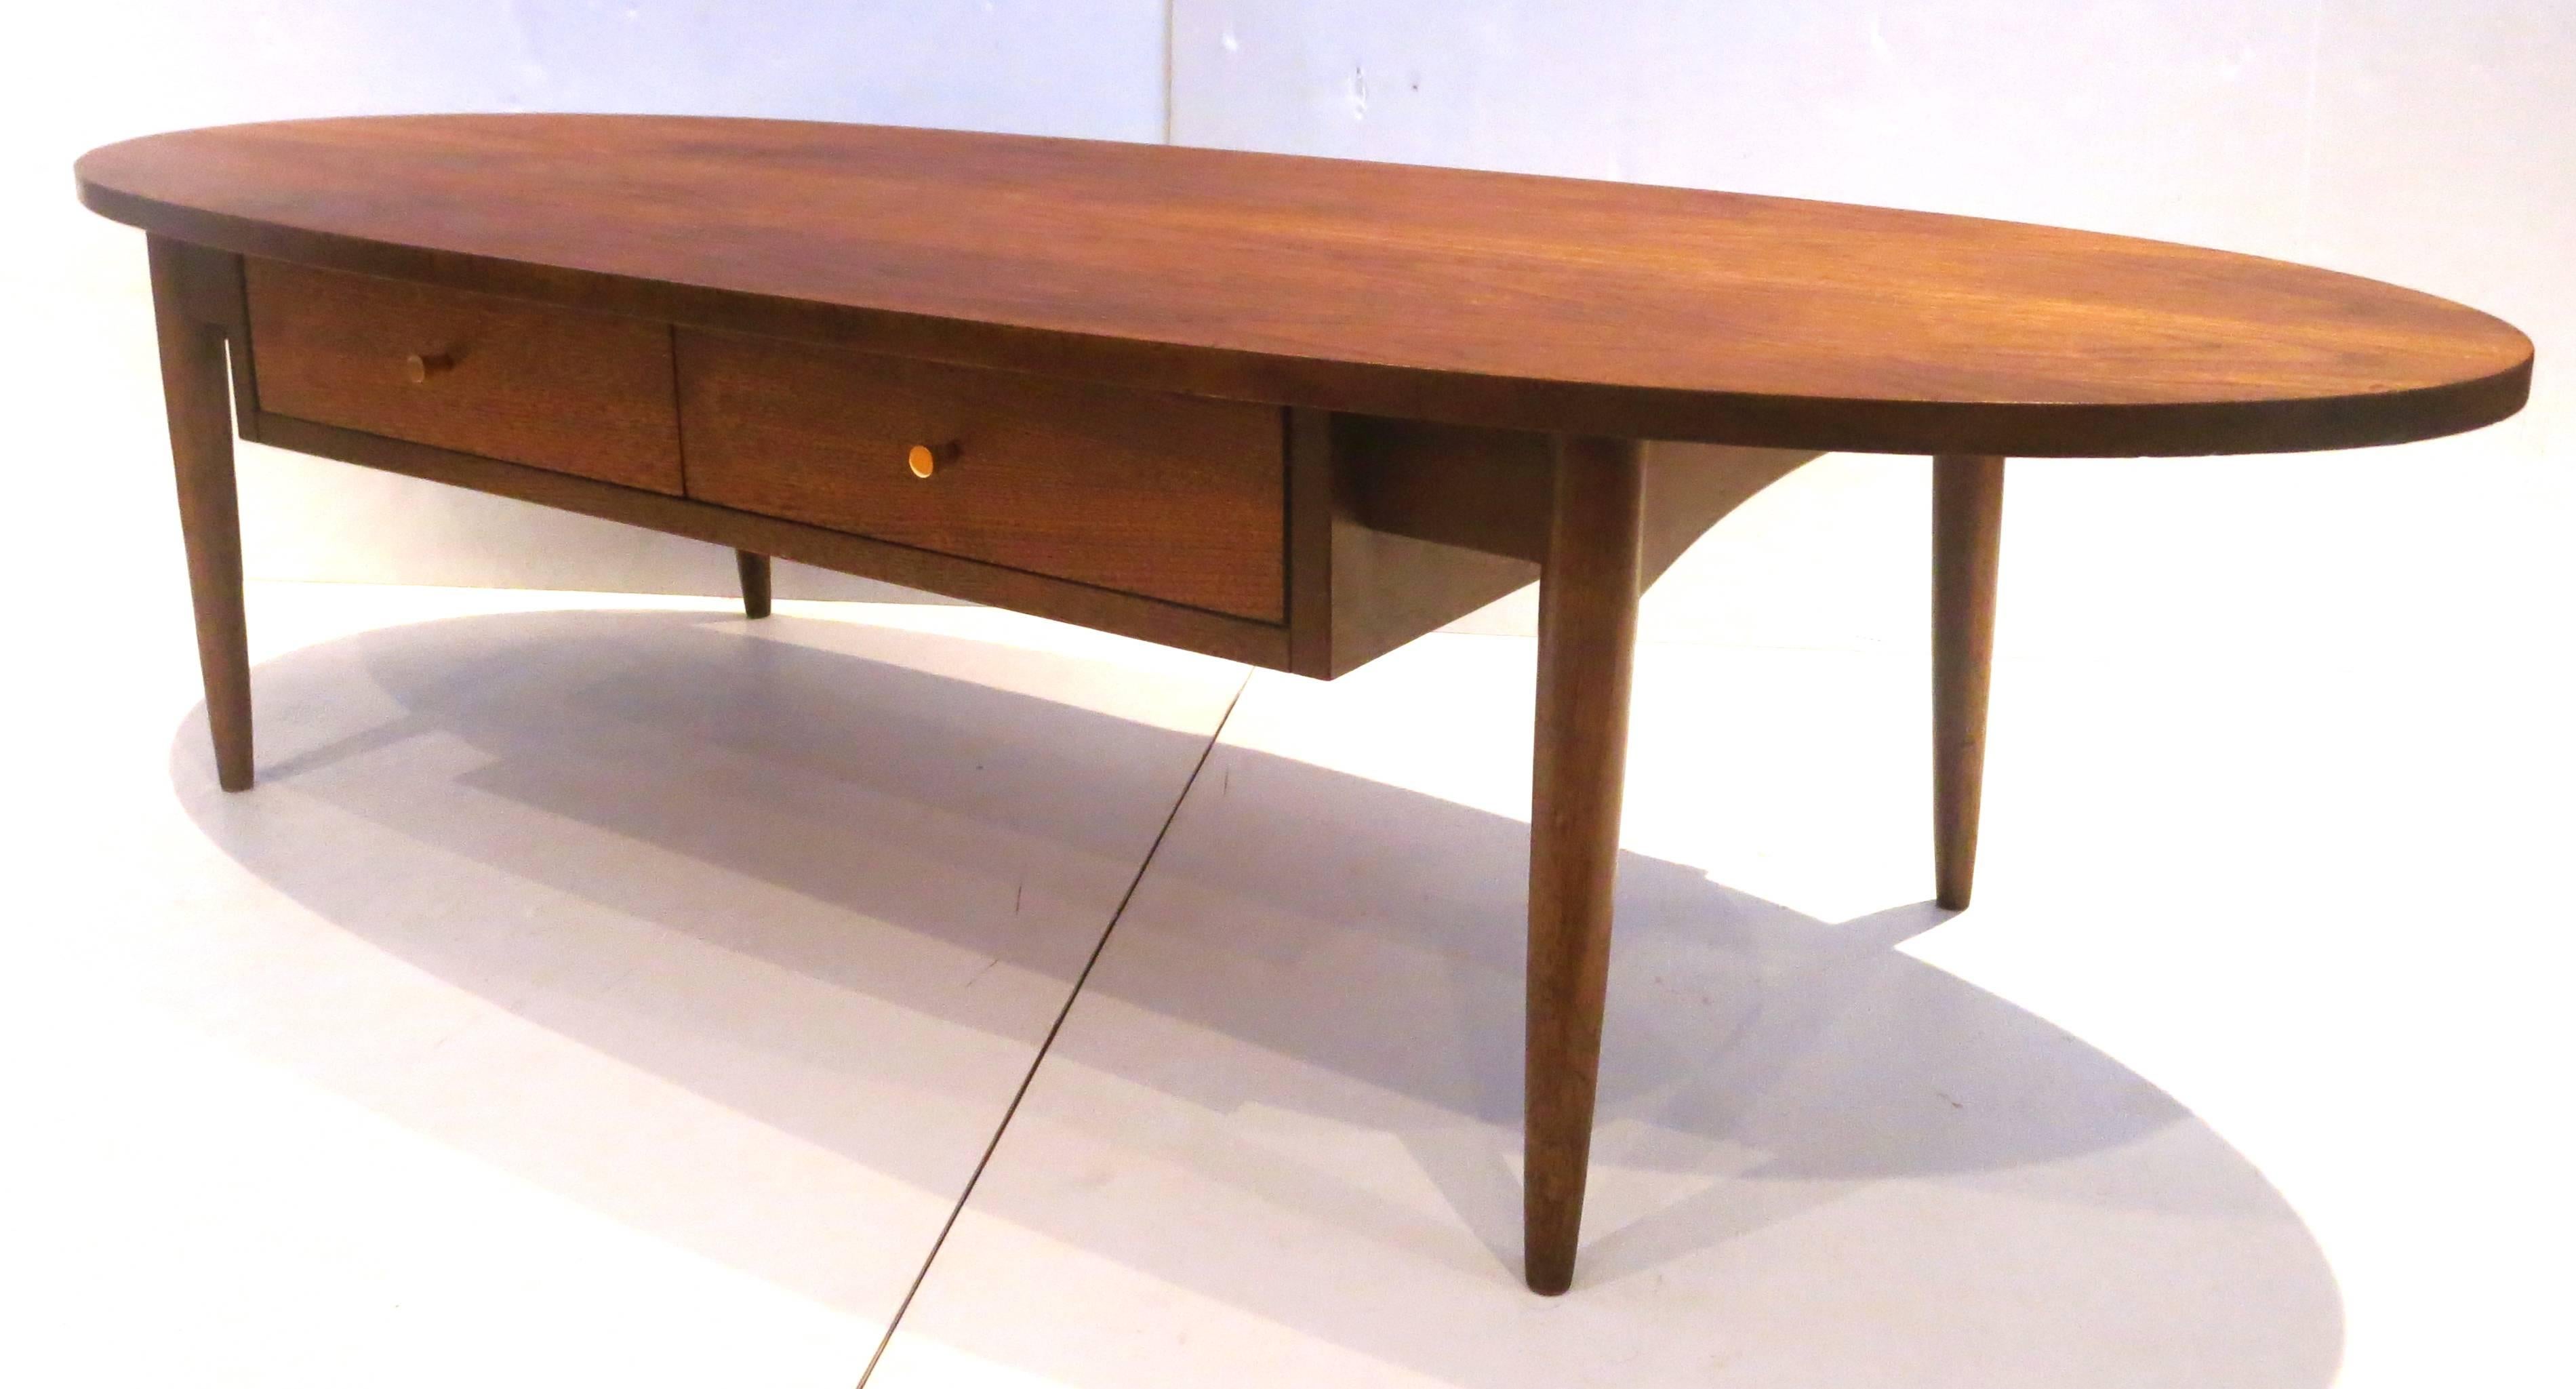 20th Century 1950s Atomic Age American Walnut Oval Coffee Table with Brass Knobs